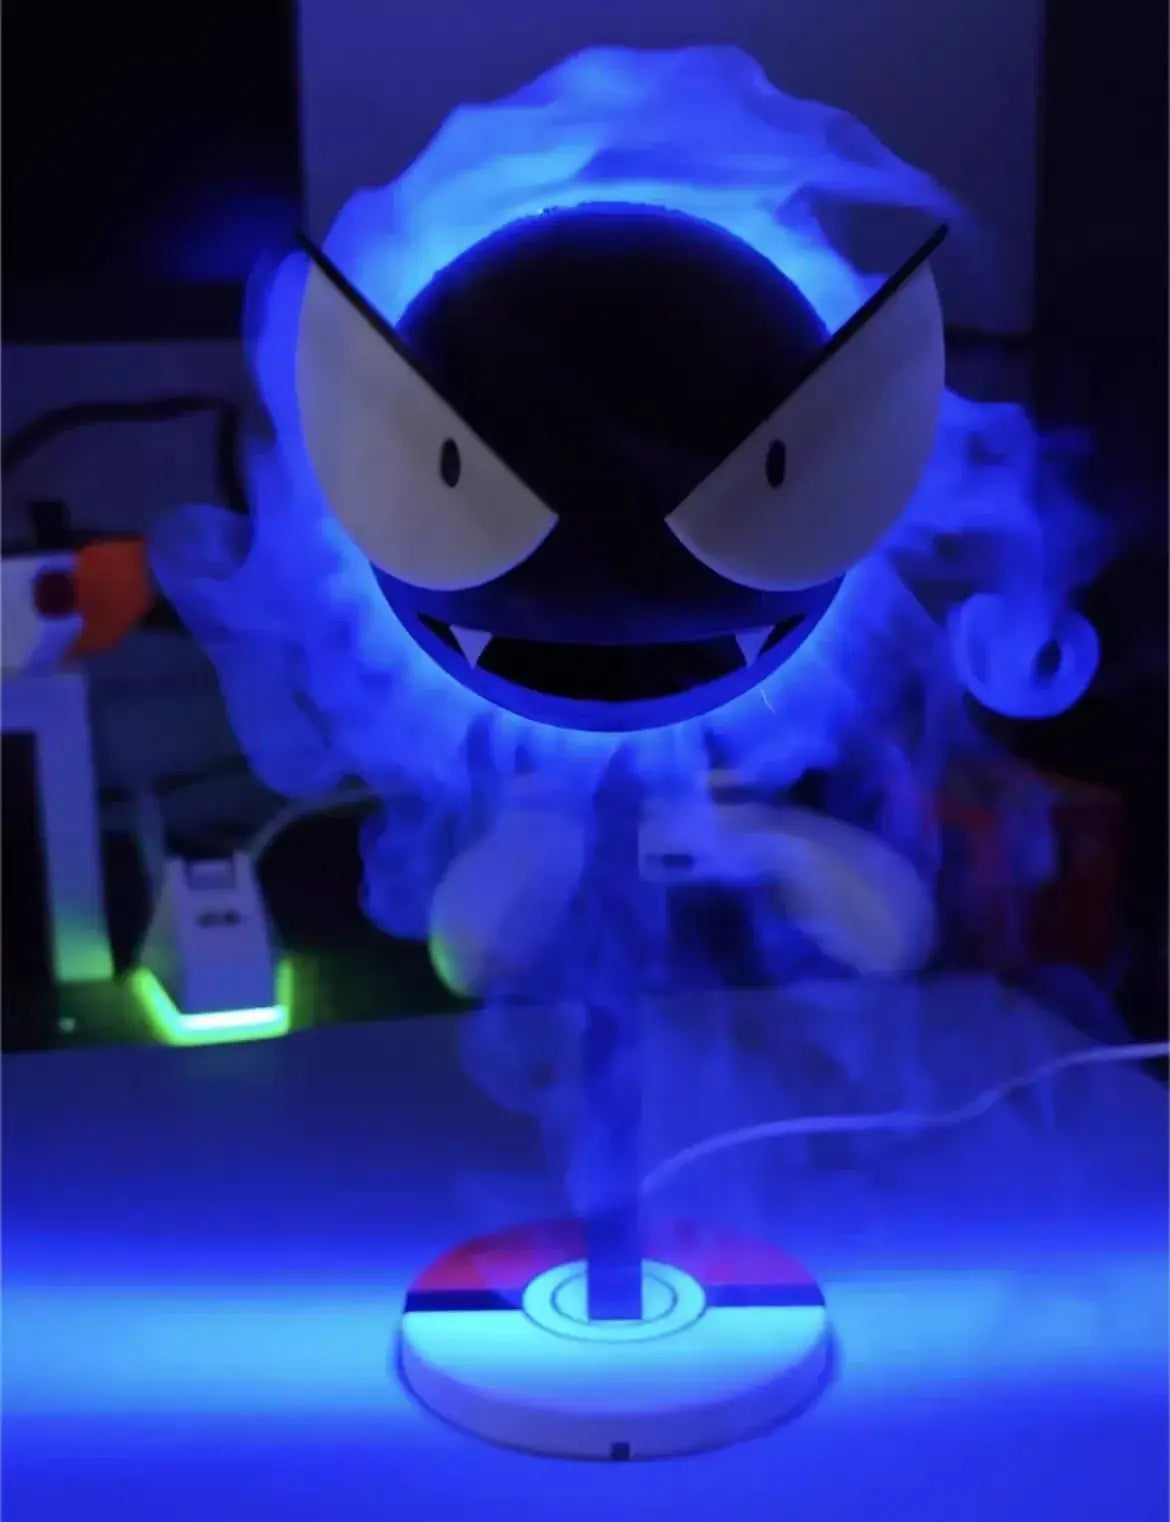 3D Air Humidifier/ humificador de aire Gastly